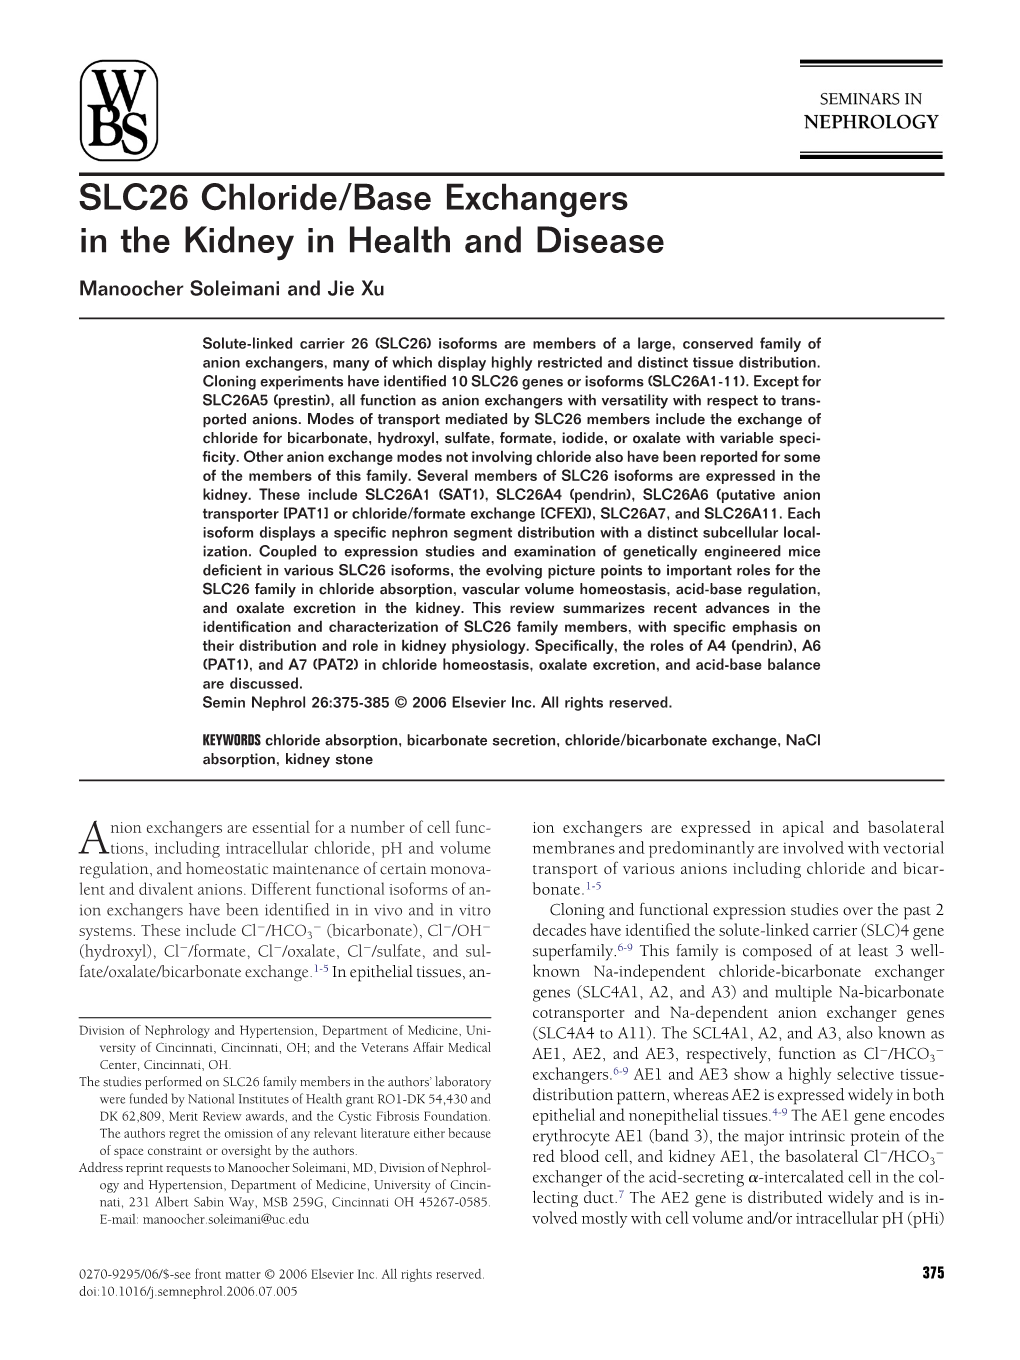 SLC26 Chloride/Base Exchangers in the Kidney in Health and Disease Manoocher Soleimani and Jie Xu